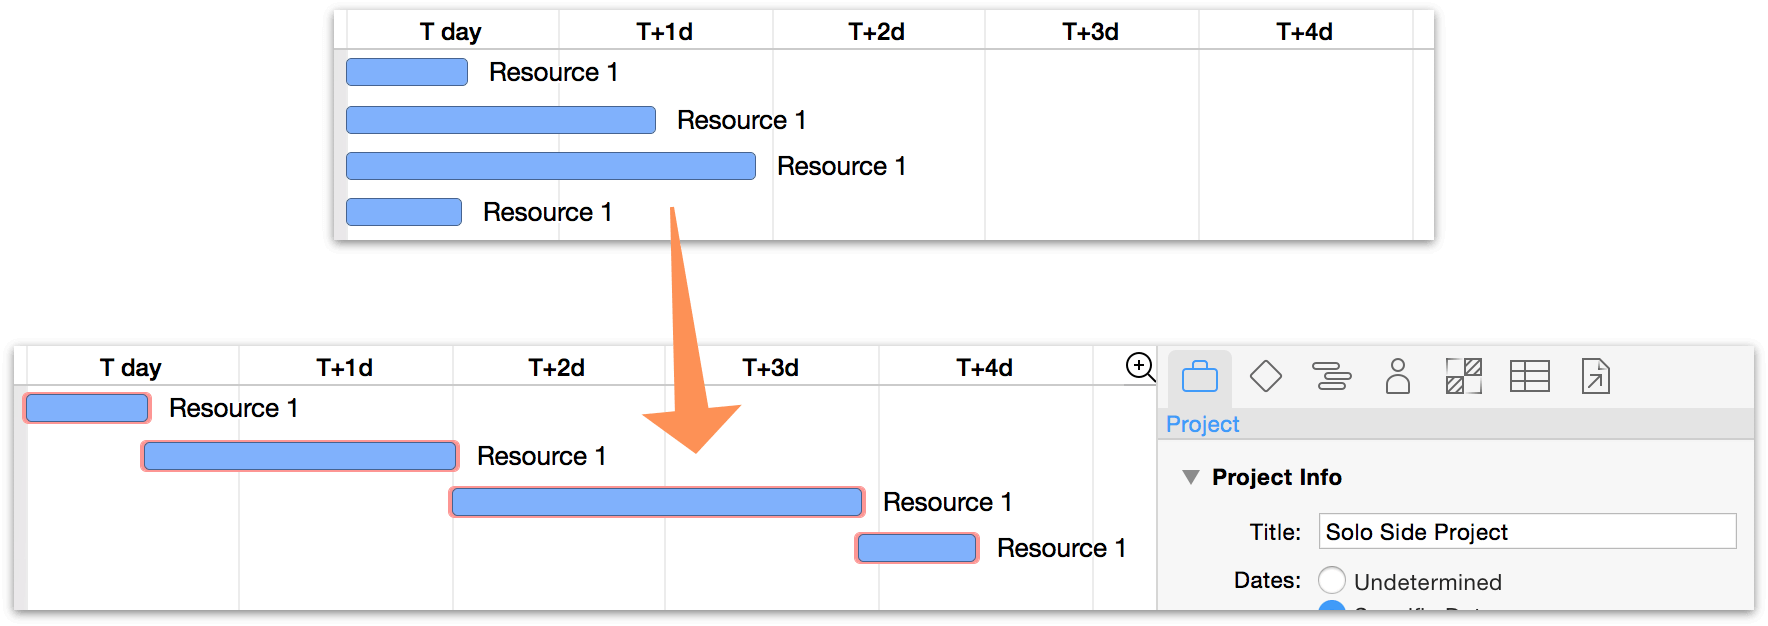 Tasks scheduled by resource availability.